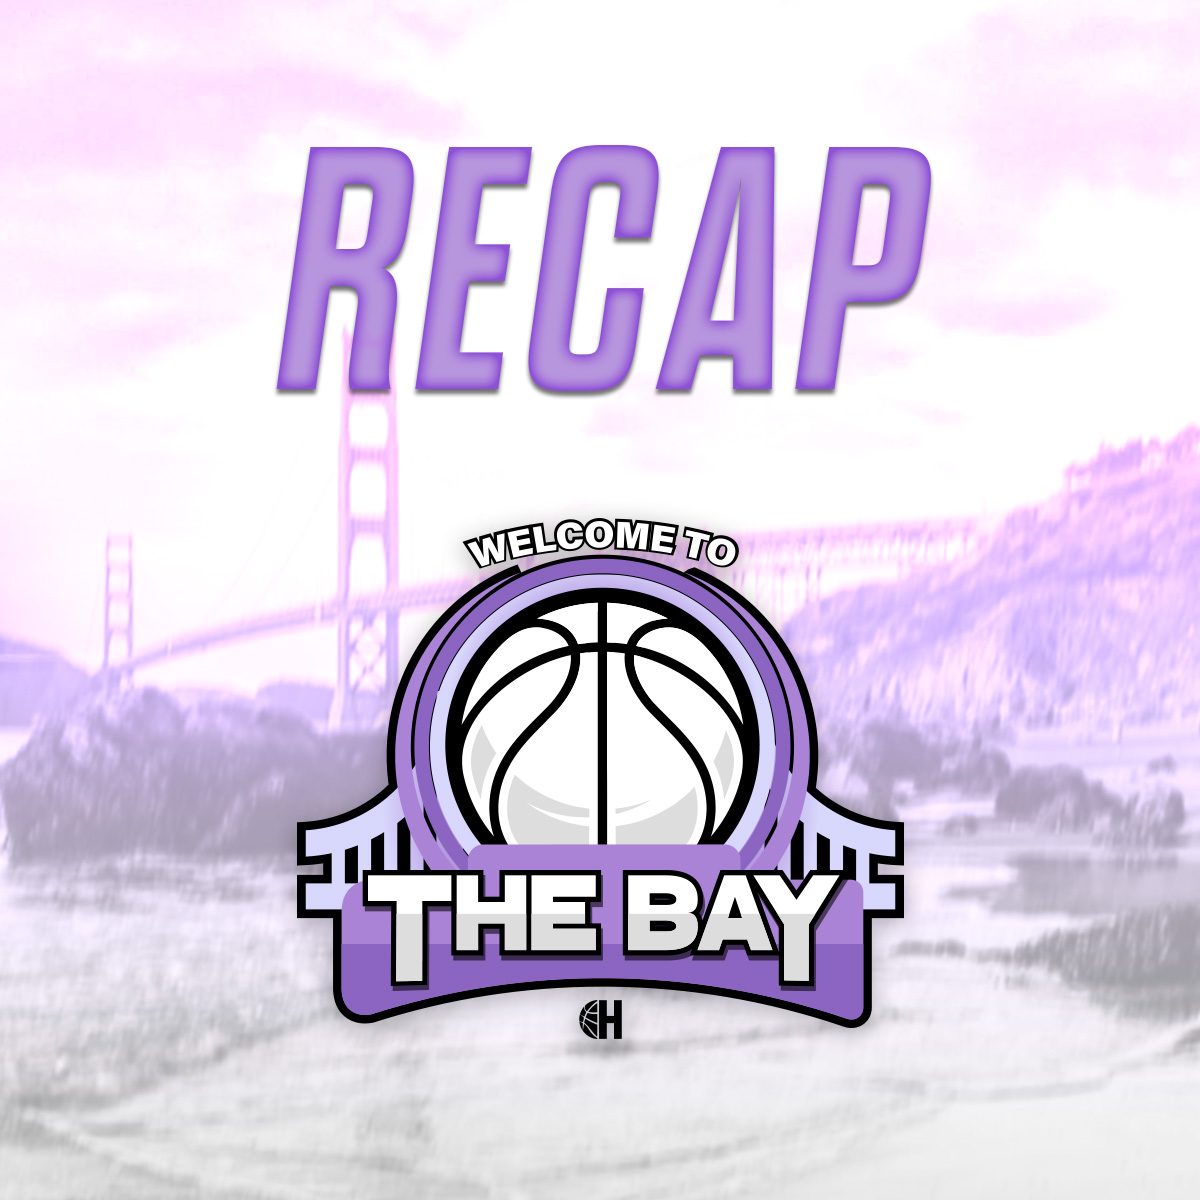 East Bay alive this weekend with top girls basketball